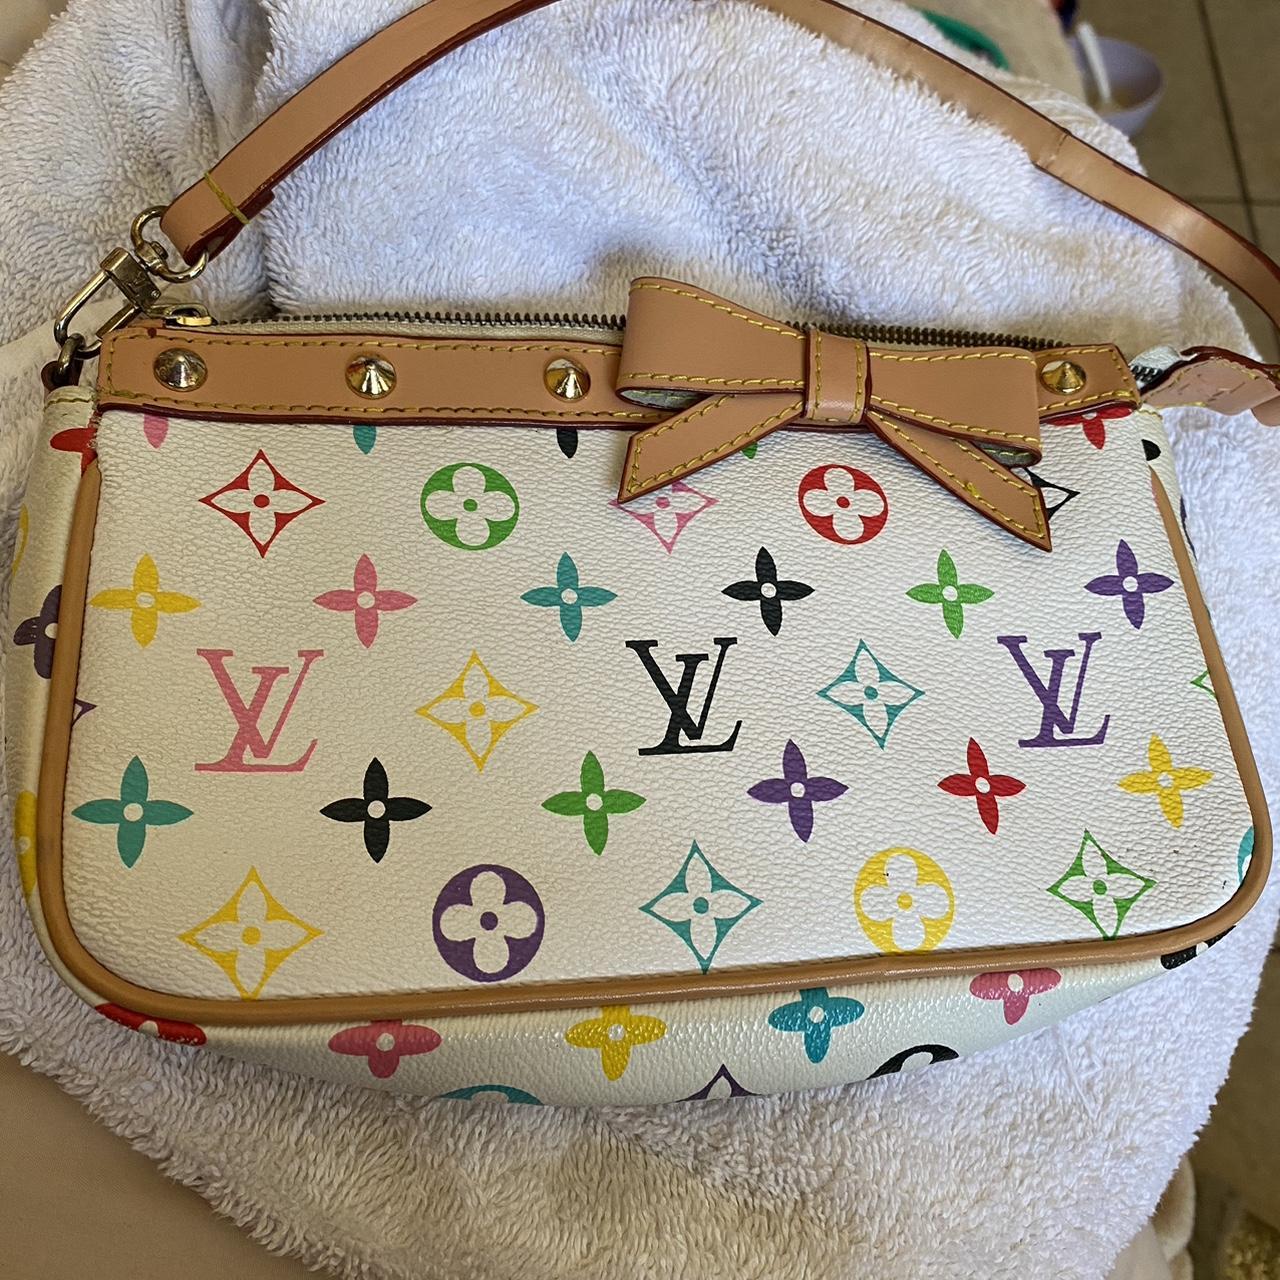 Lv bag so beautiful only bad thing is the zipper - Depop